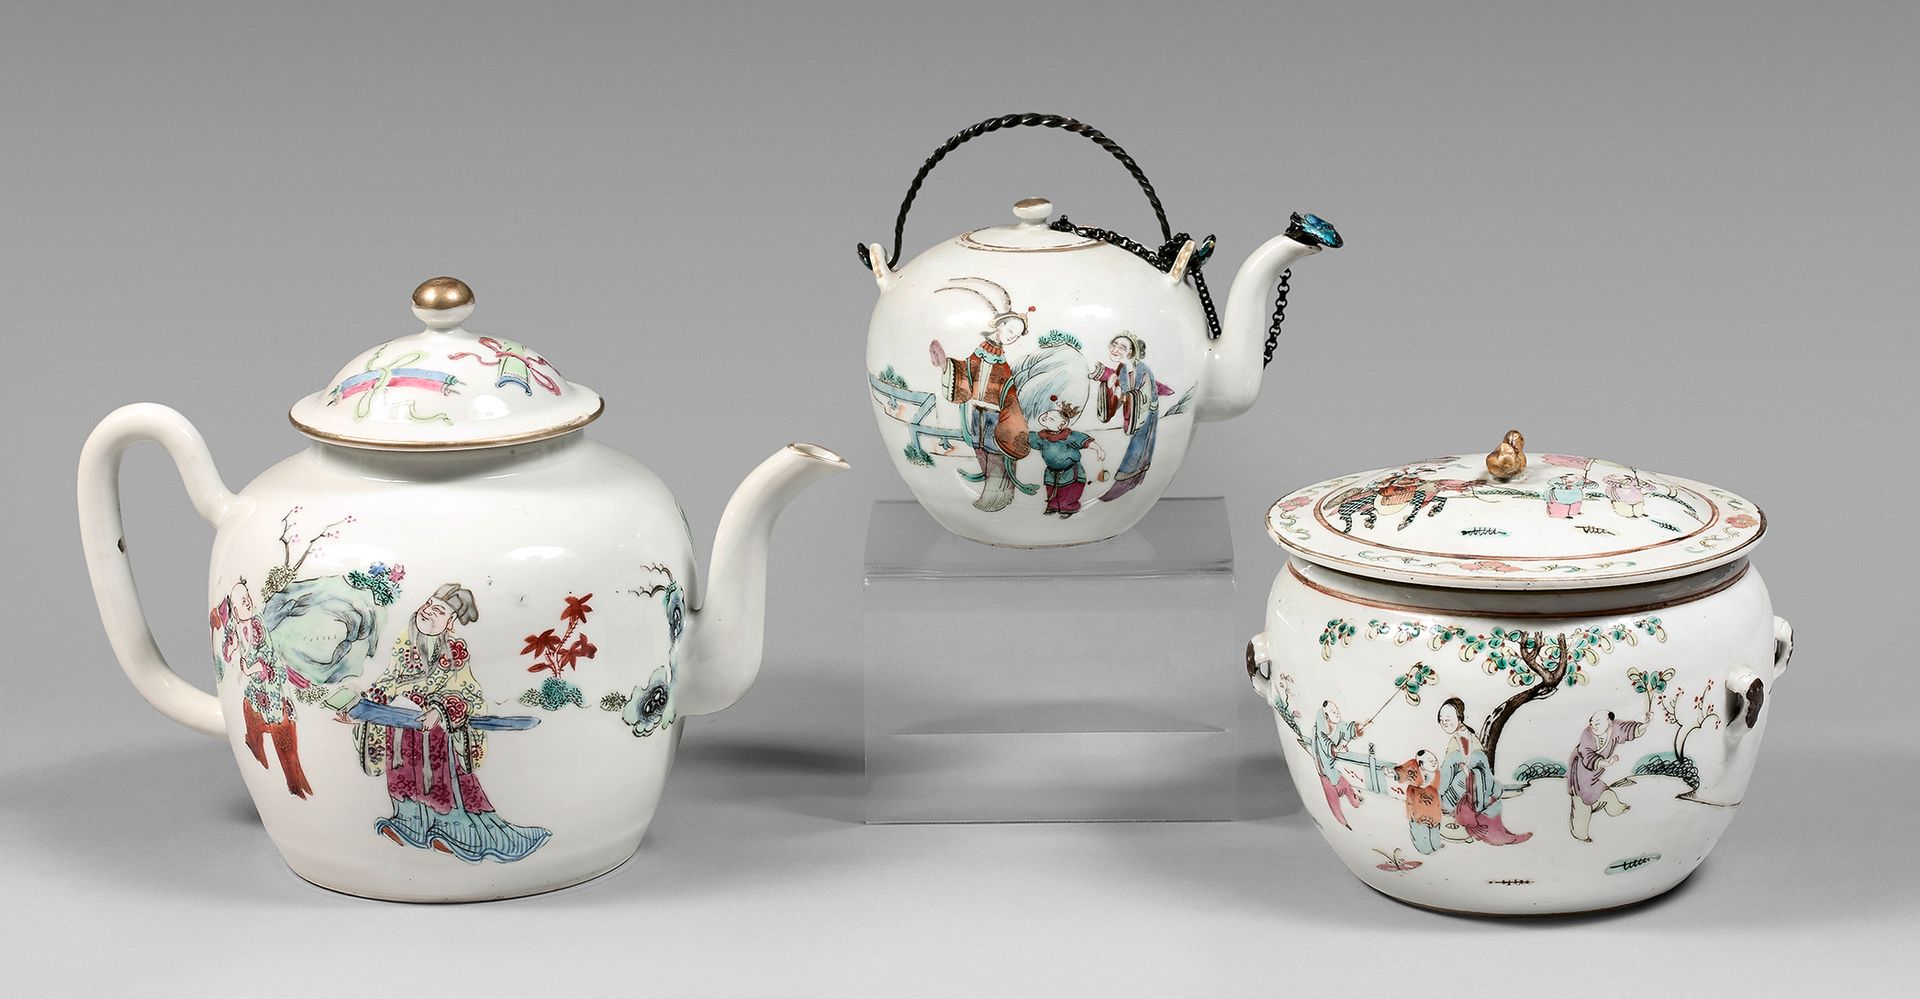 CHINE - XIXe siècle A set of white porcelain enamelled in polychrome and gold in&hellip;